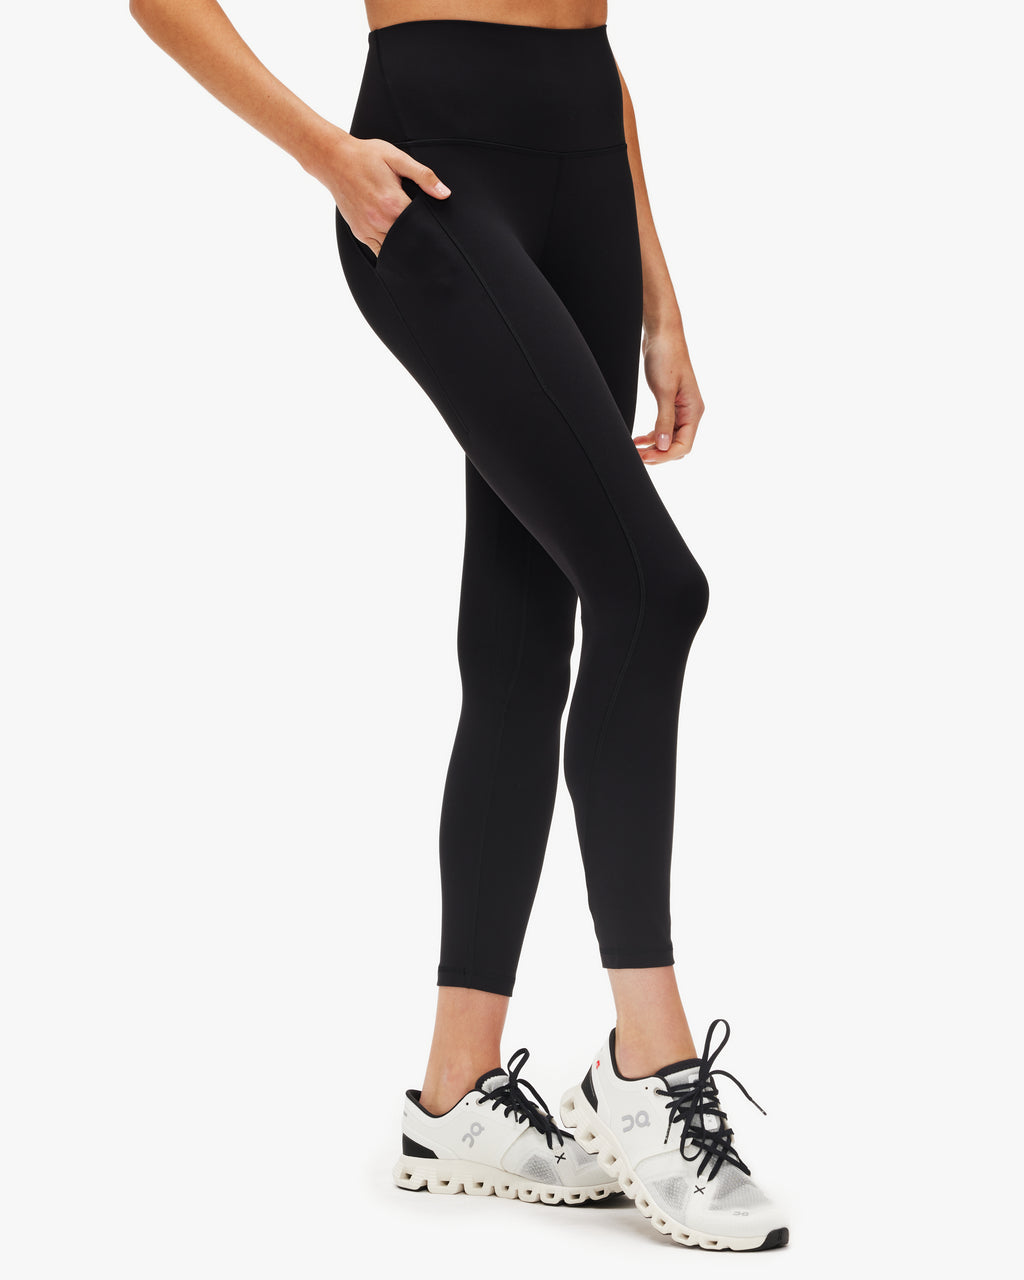 Lululemon Align™ High-Rise Pant 25 with Pockets – The Shop at Equinox